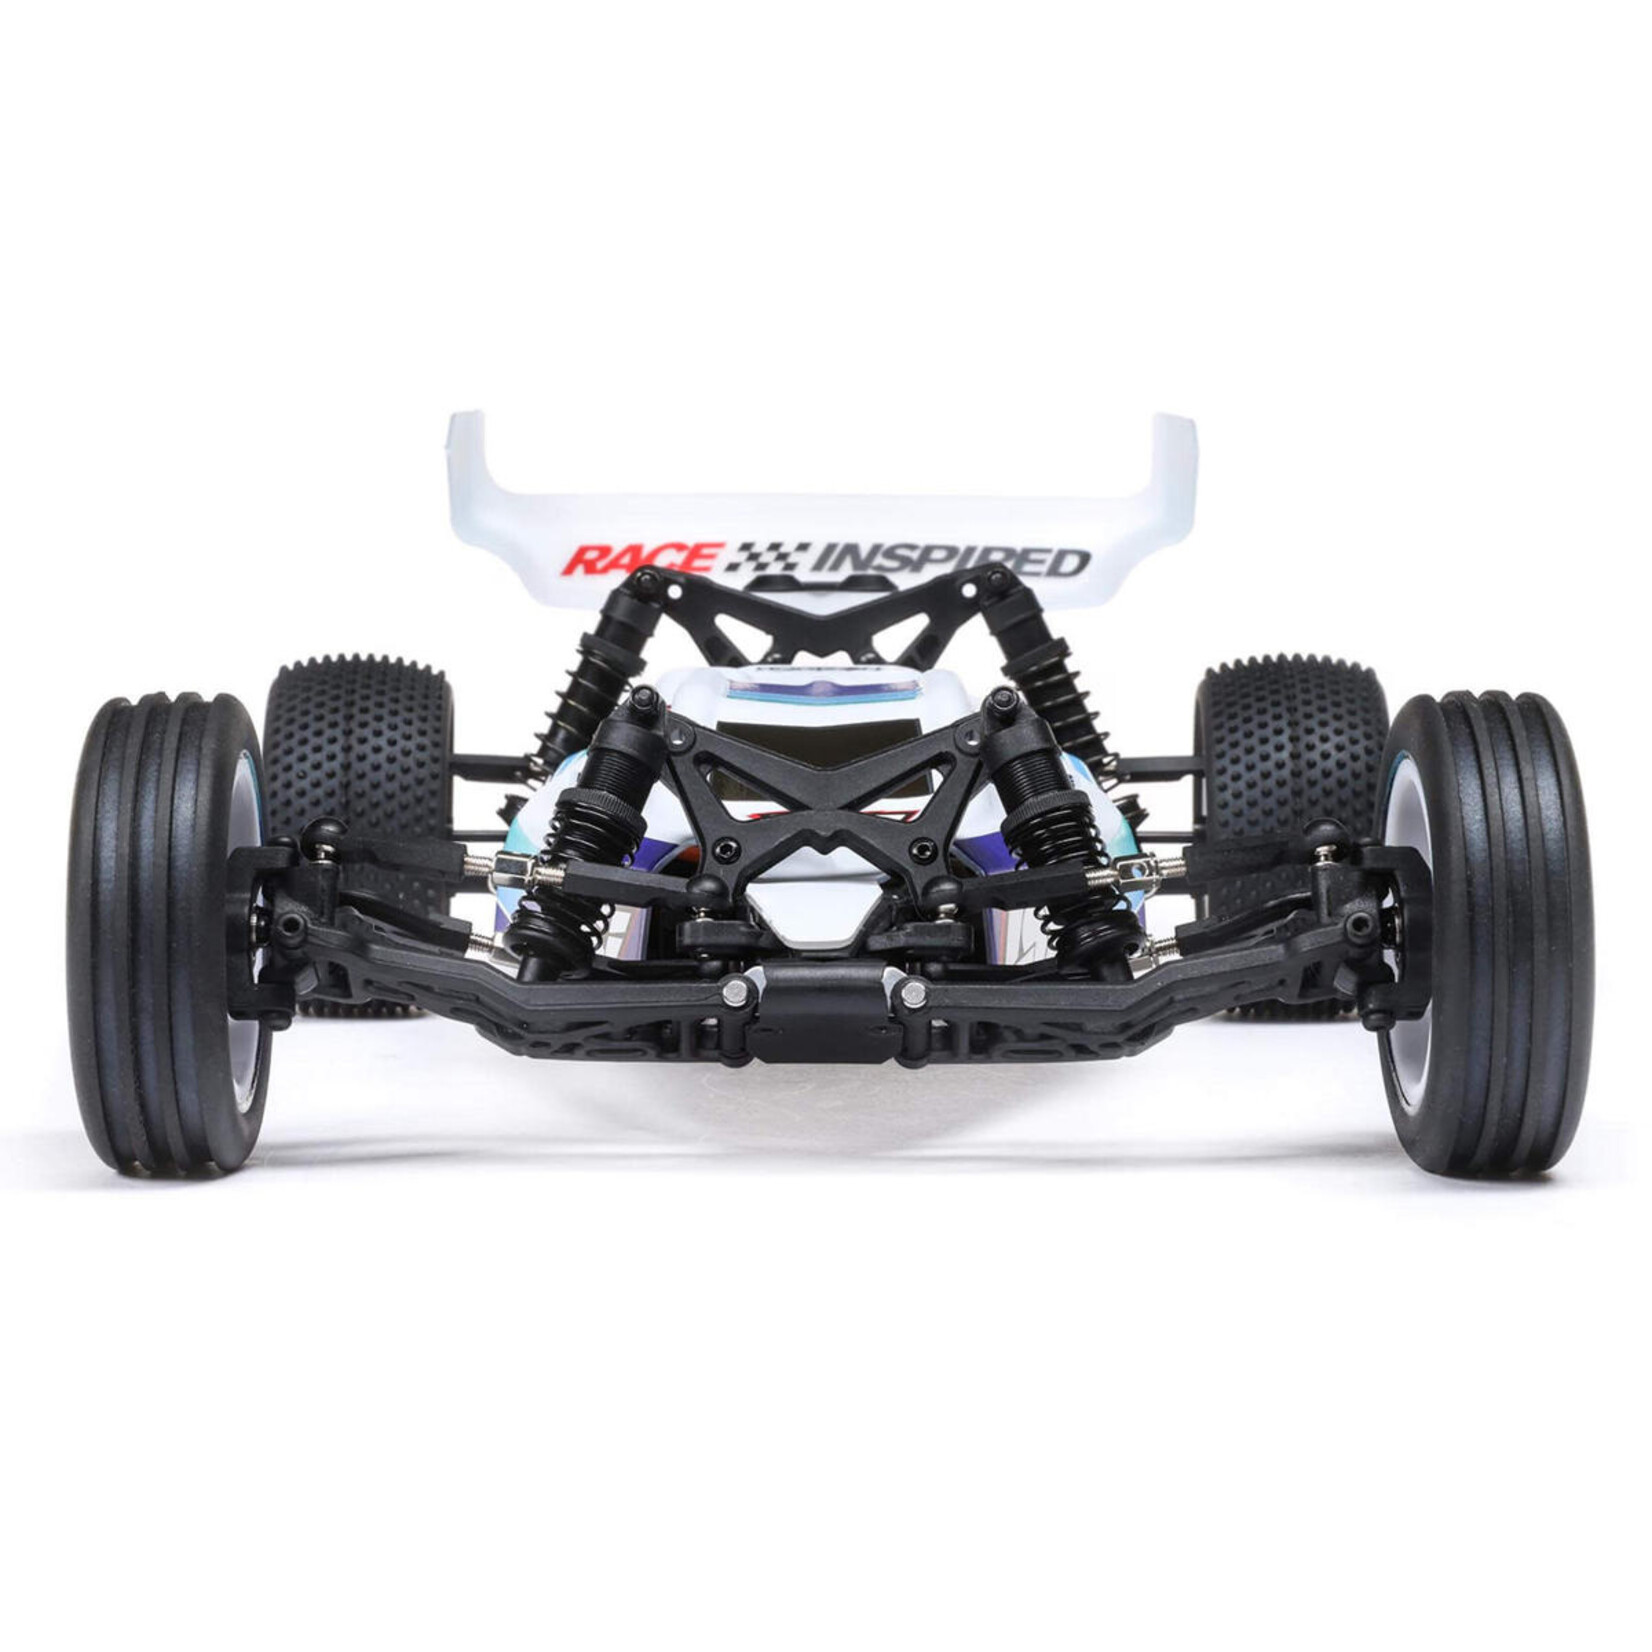 Losi Losi Mini-B 1/16 RTR Brushless 2WD Buggy (Blue) w/2.4GHz Radio, Battery & Charger #LOS01024T2